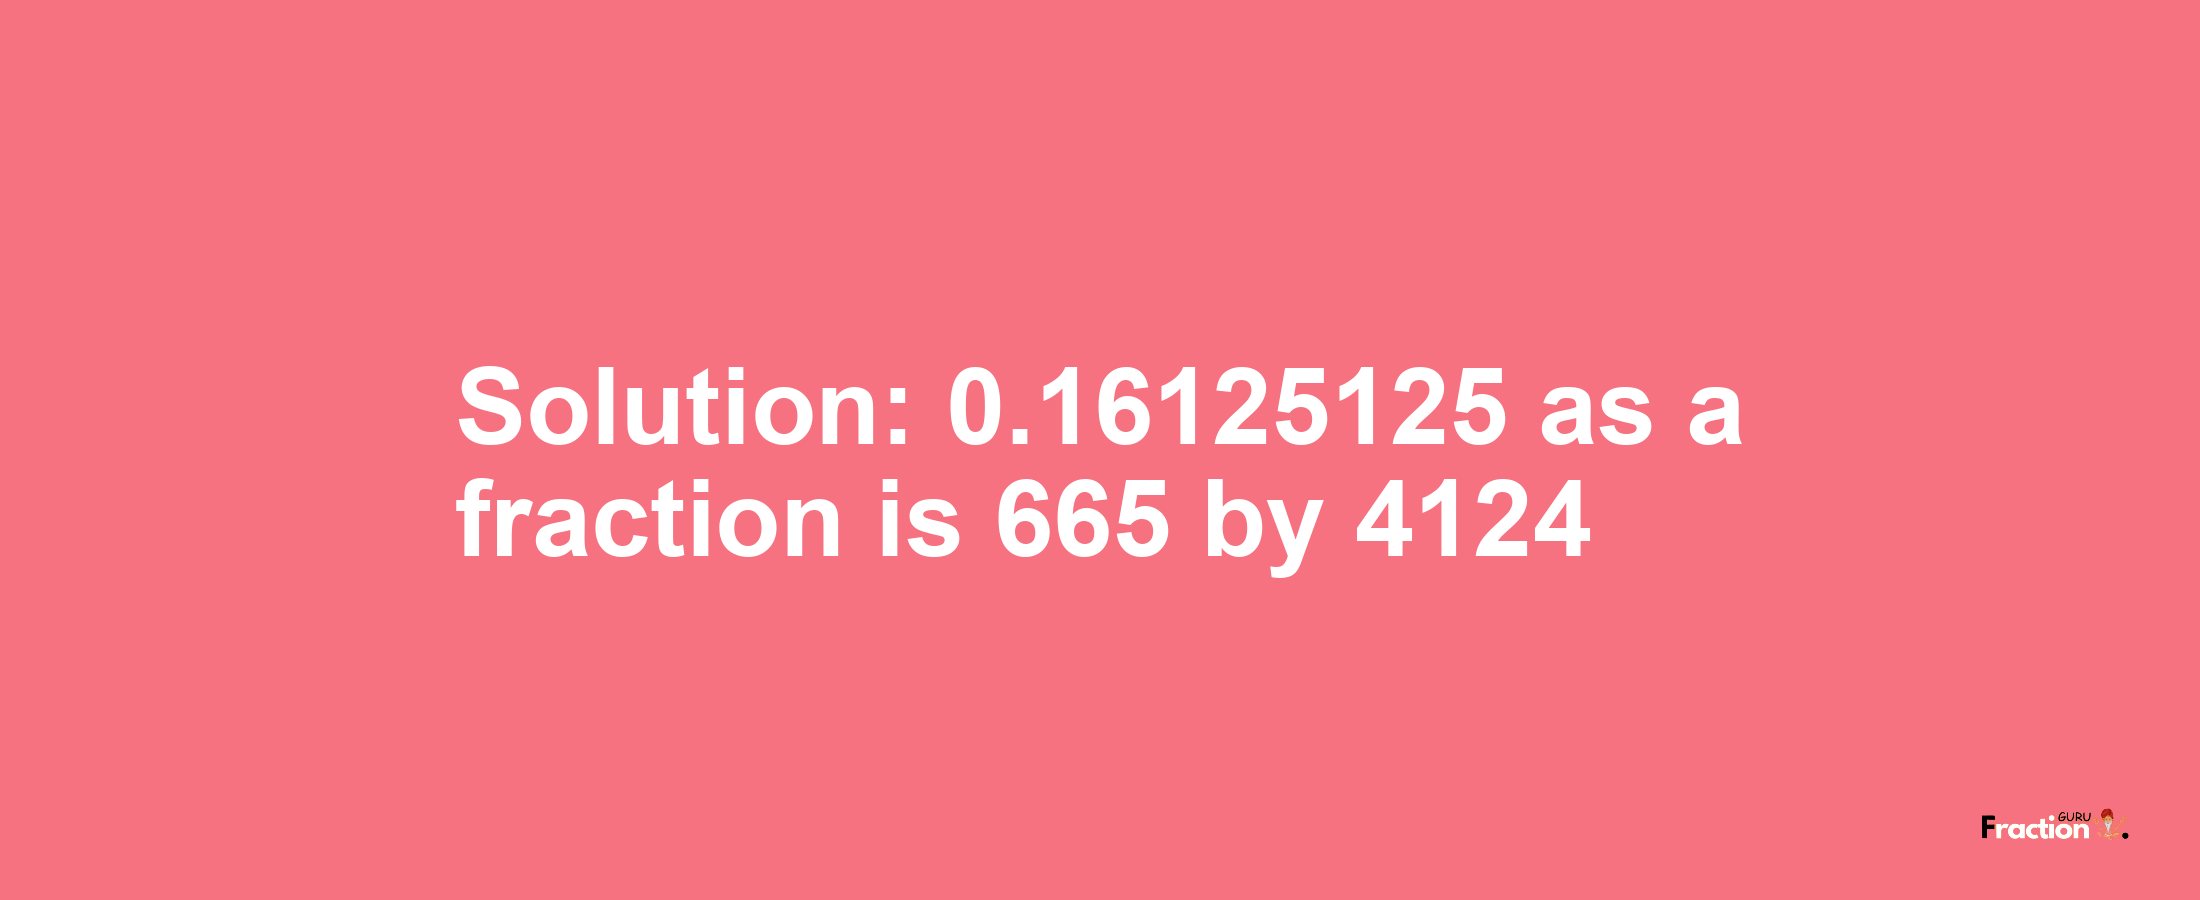 Solution:0.16125125 as a fraction is 665/4124